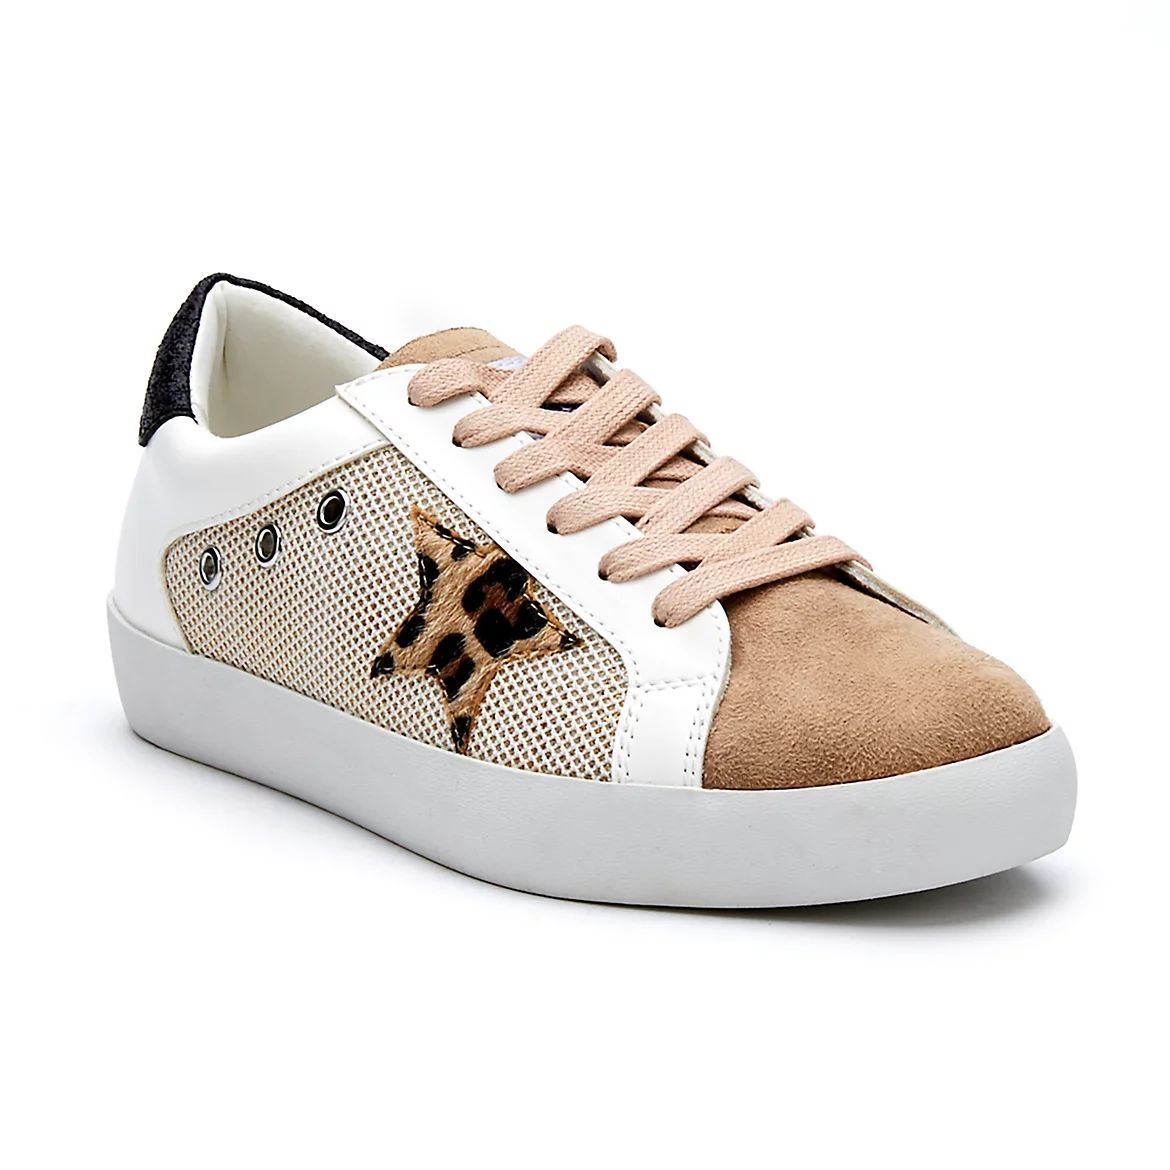 Coconuts by Matisse Melody Women's Sneakers | Kohl's